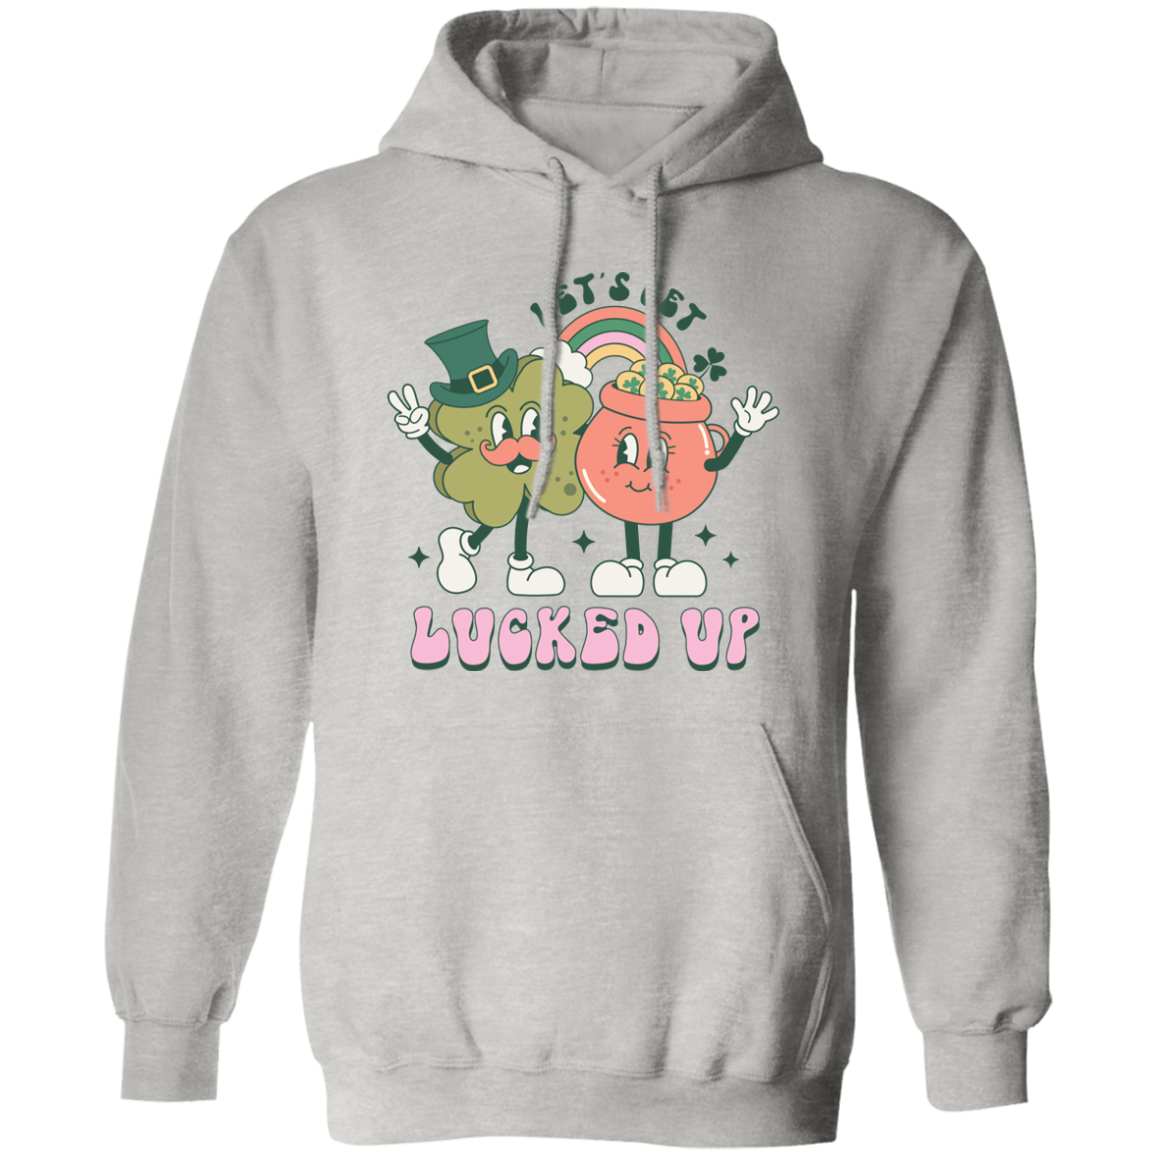 Let's Get Lucked Up - Unisex Pullover Hoodie